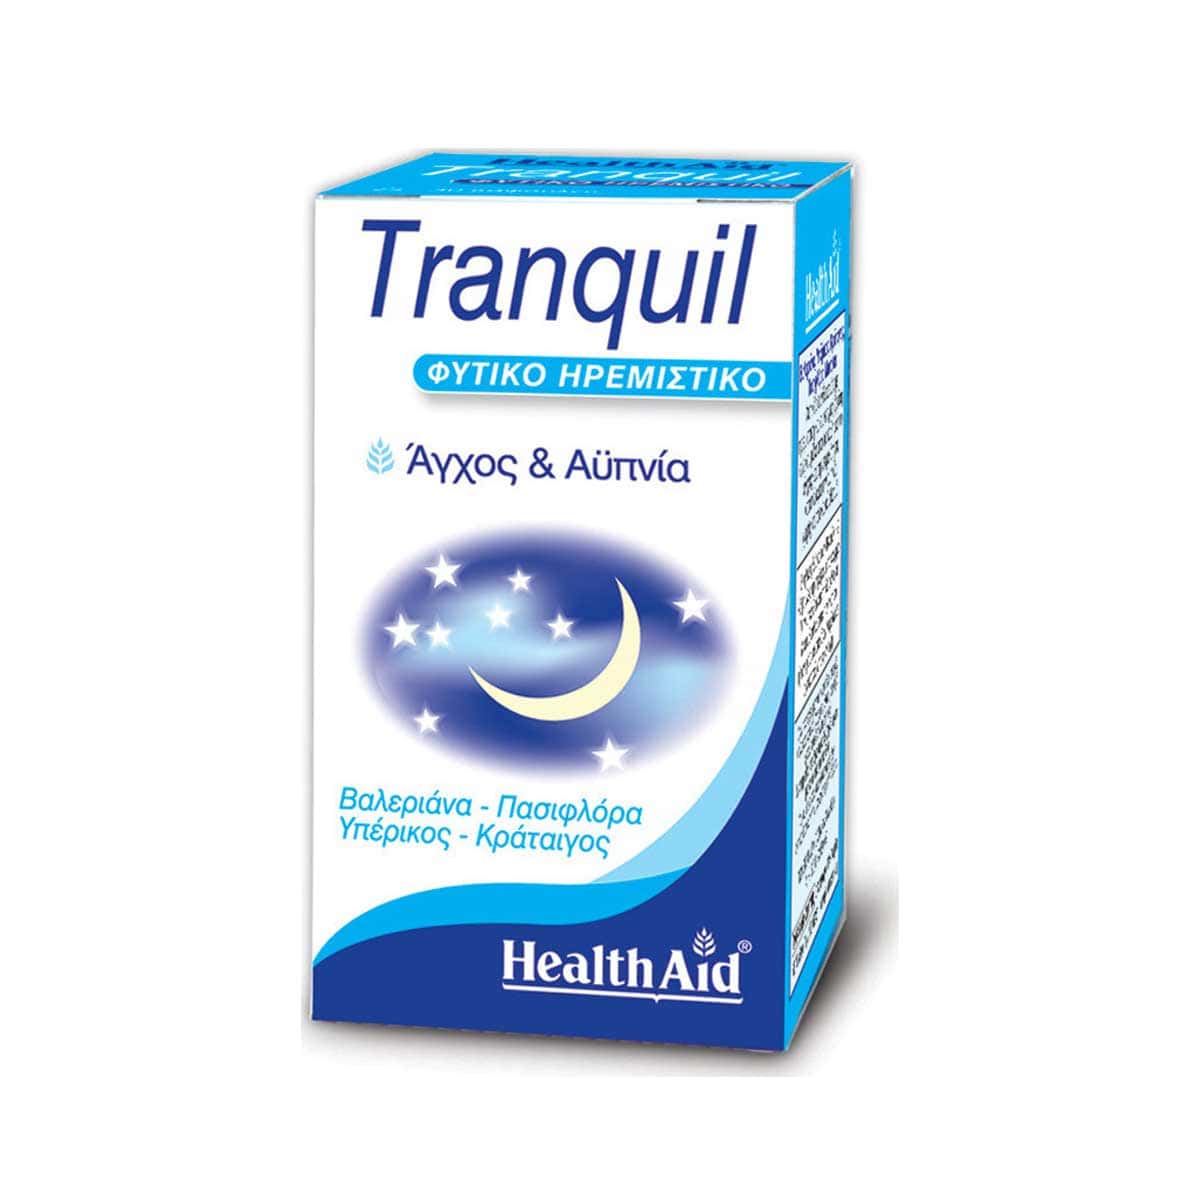 Health-Aid-Tranquil-30-kapsoules-5019781015207